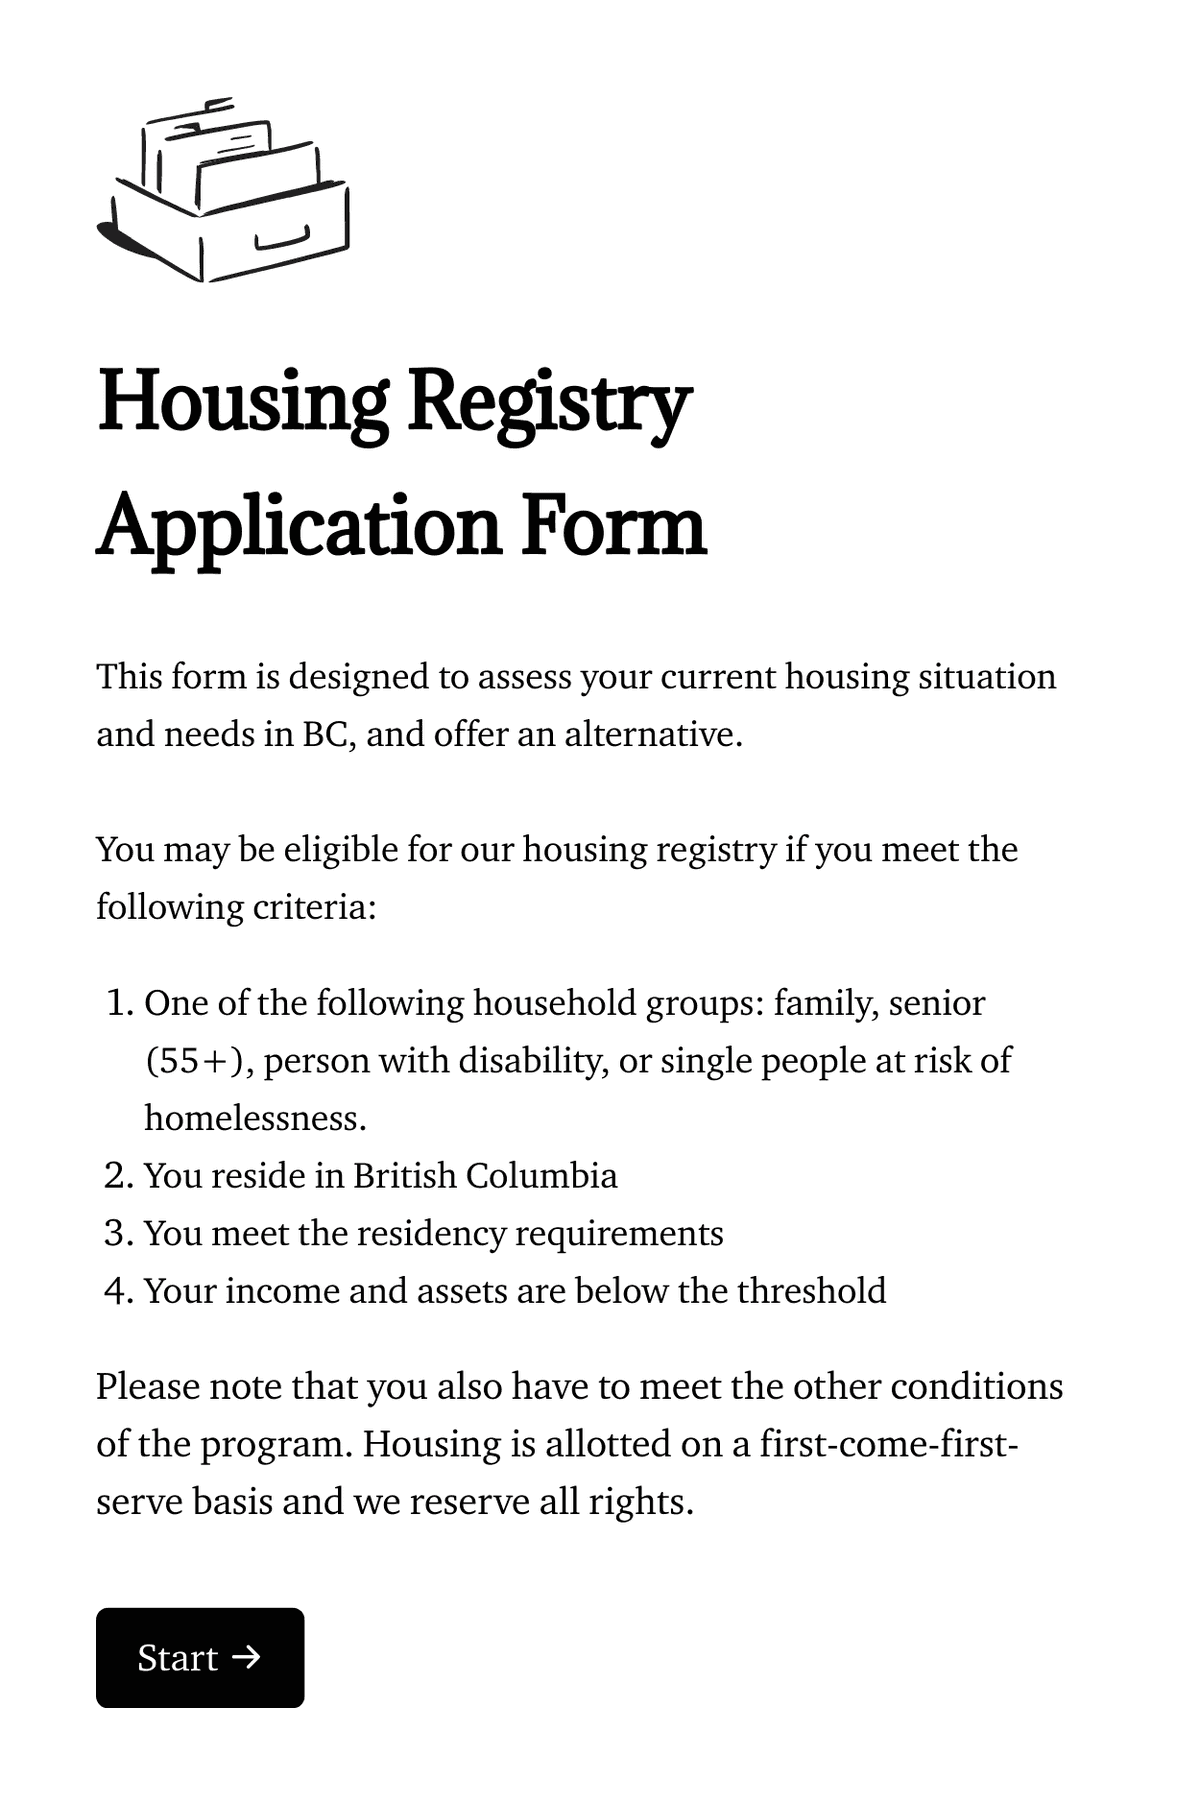 Welcome step of 'Housing registry application form' with an image, introduction text, and a 'Start' button